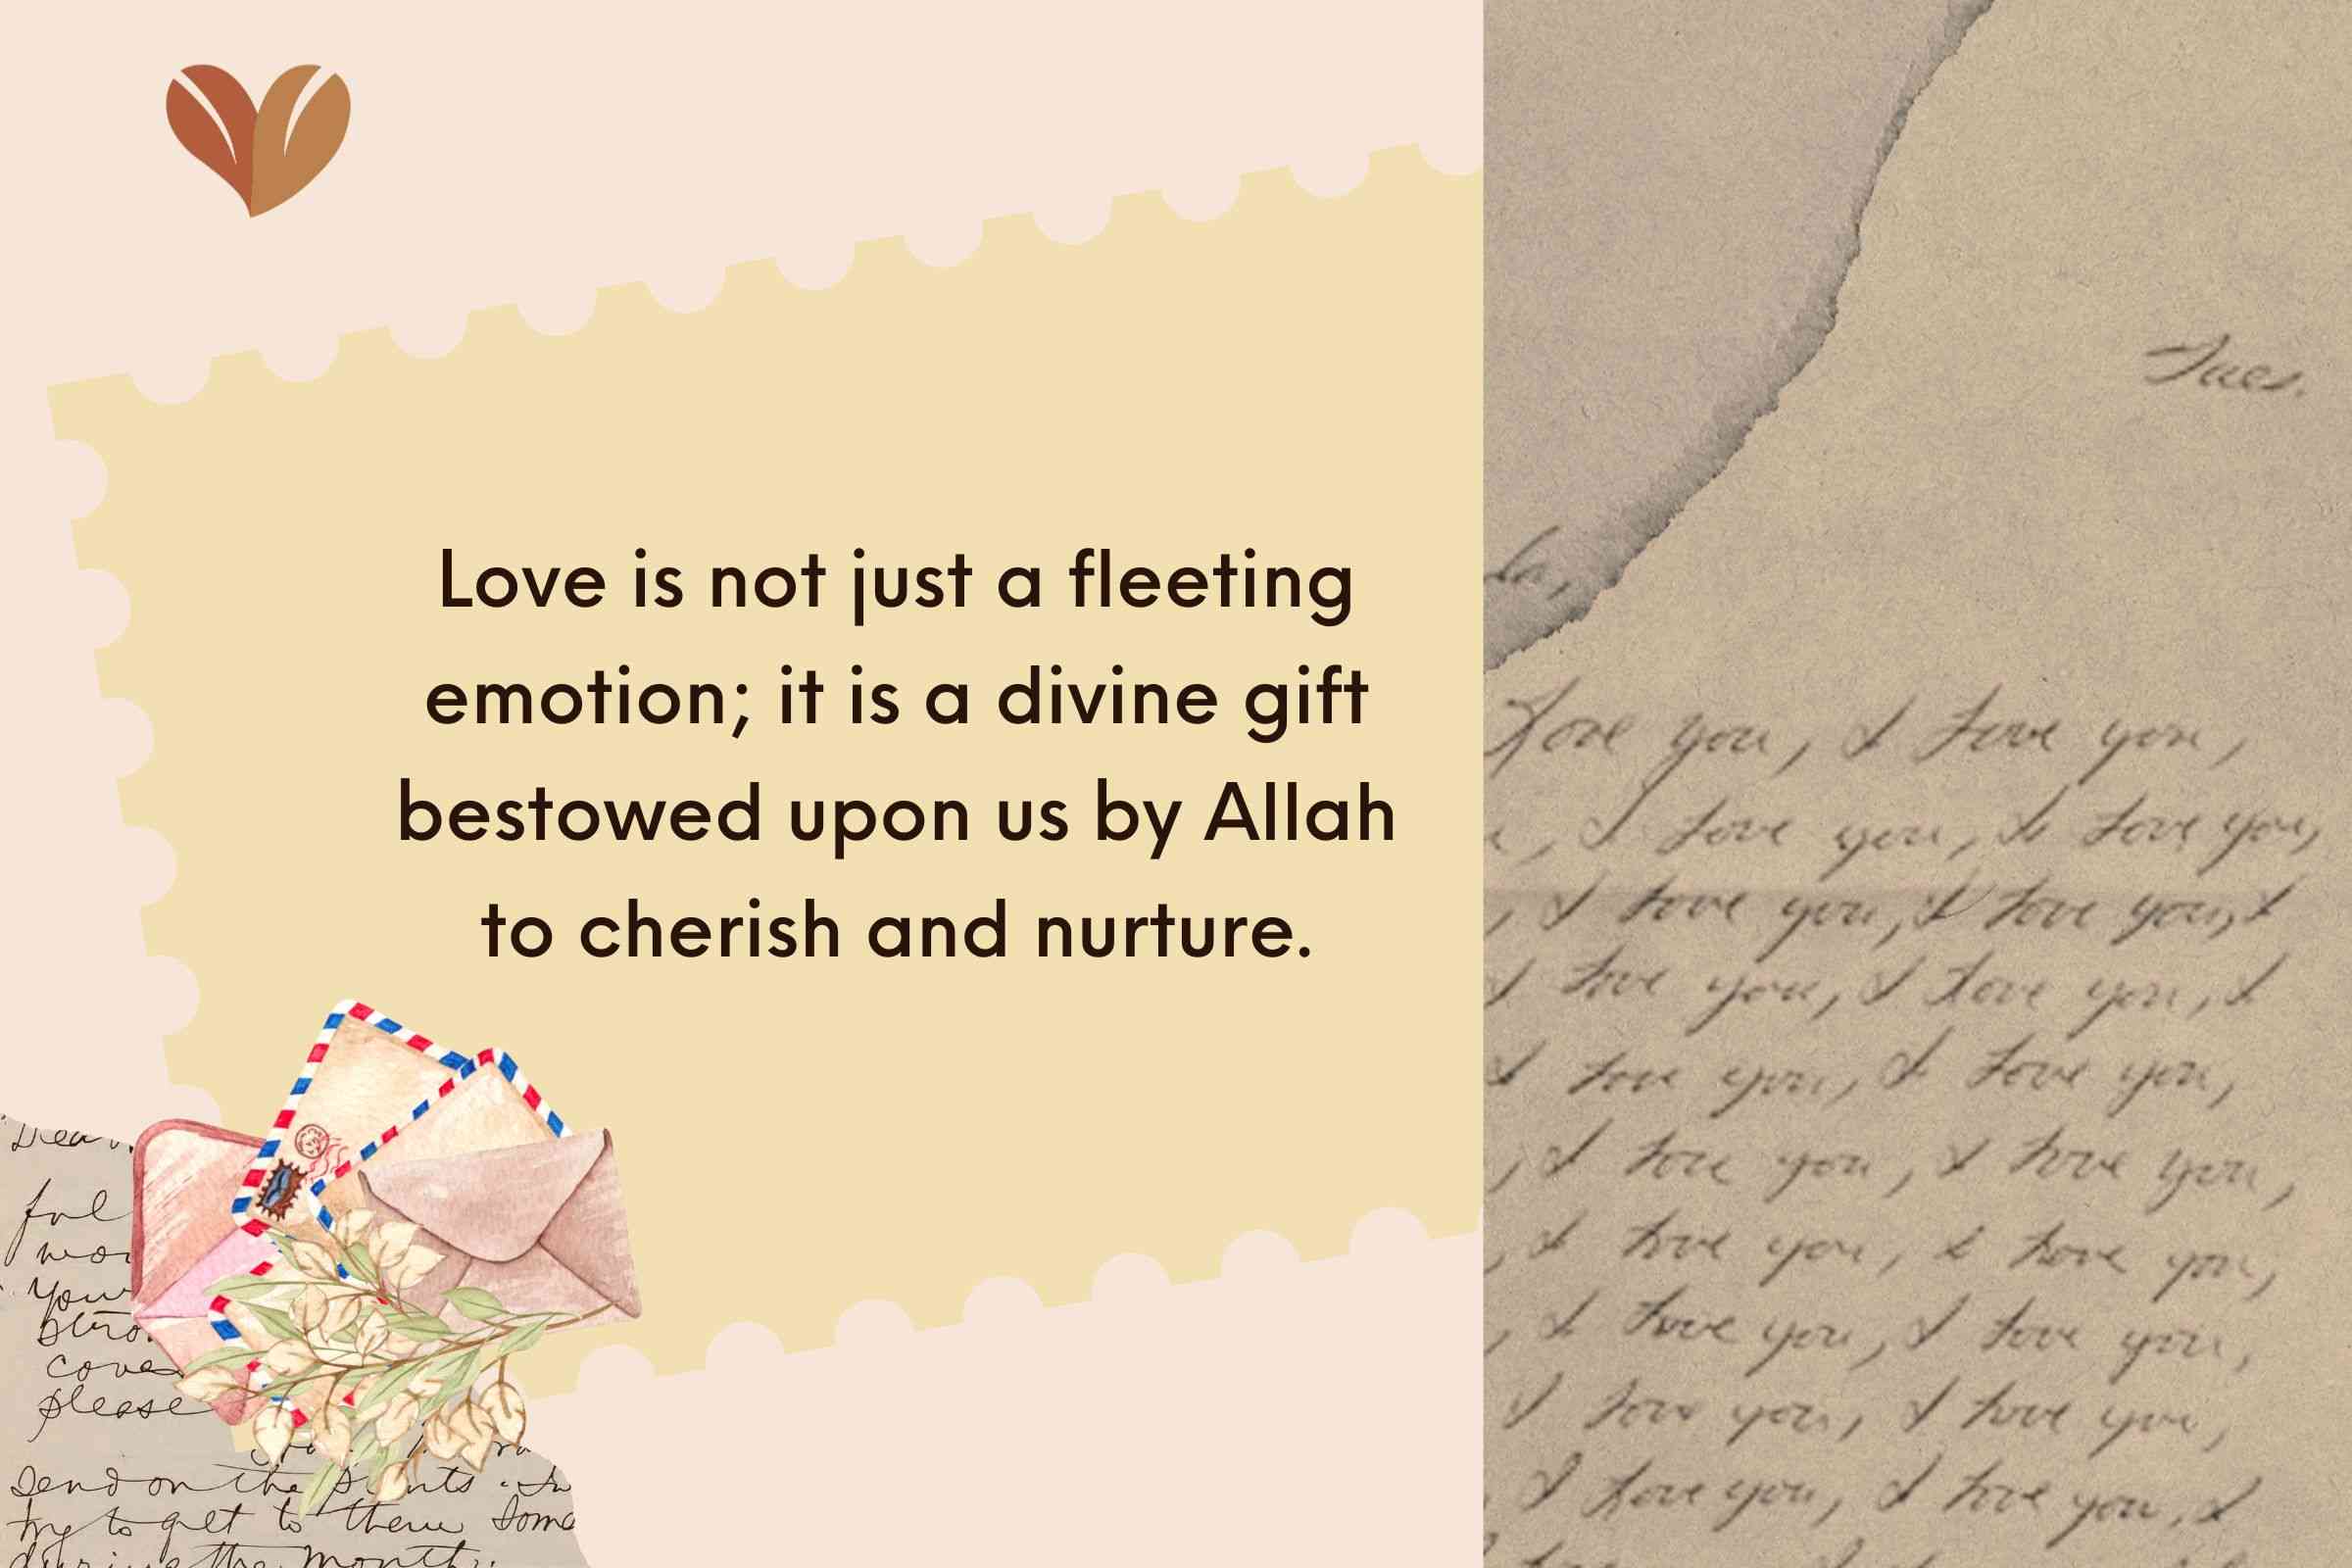 Love is not just a fleeting emotion; it is a divine gift bestowed upon us by Allah to cherish and nurture